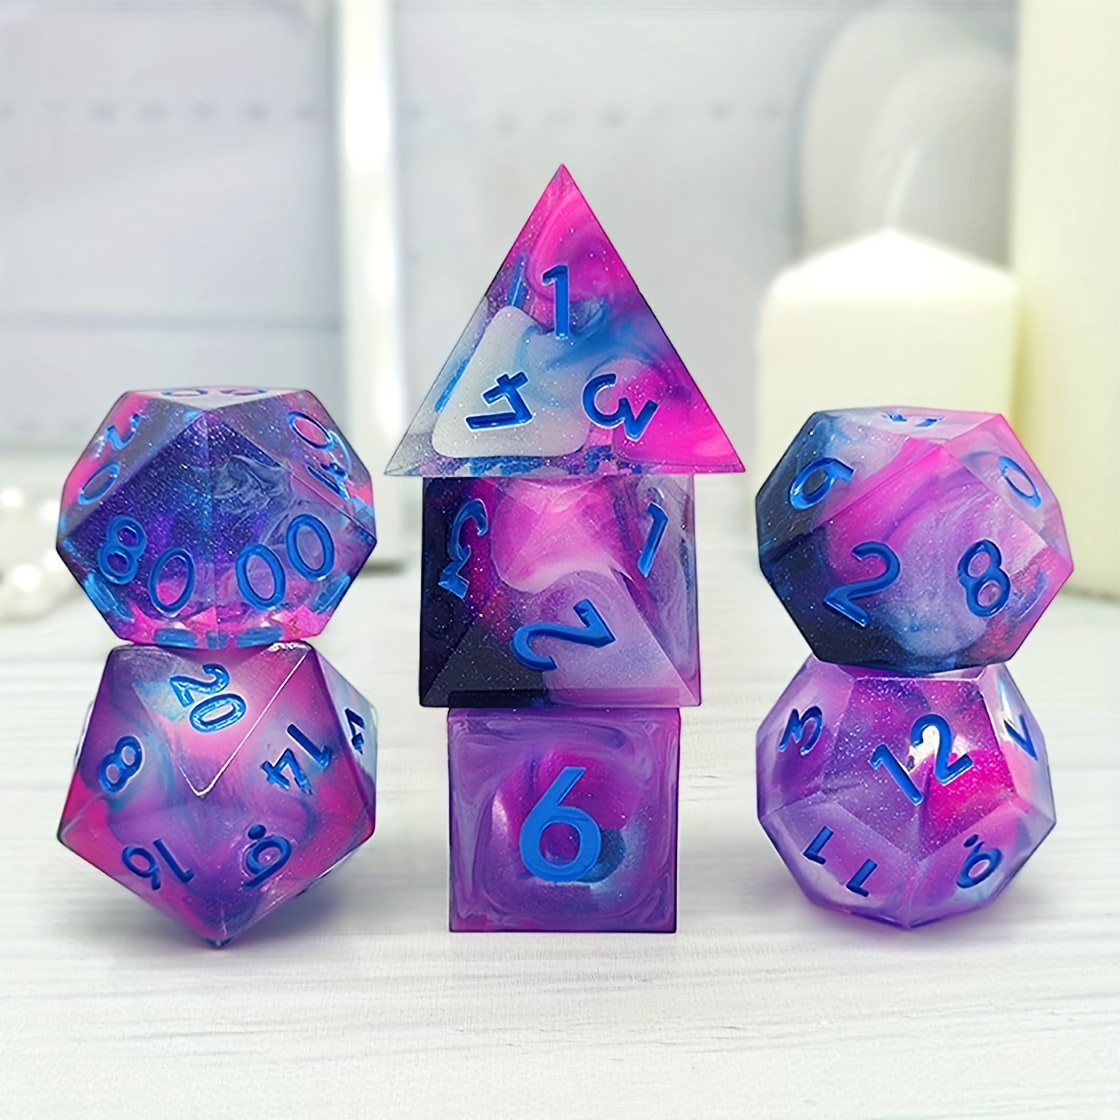 Dice Resin Mold, Dice Mold Set, Polyhedral Game Dice Molds, Multi